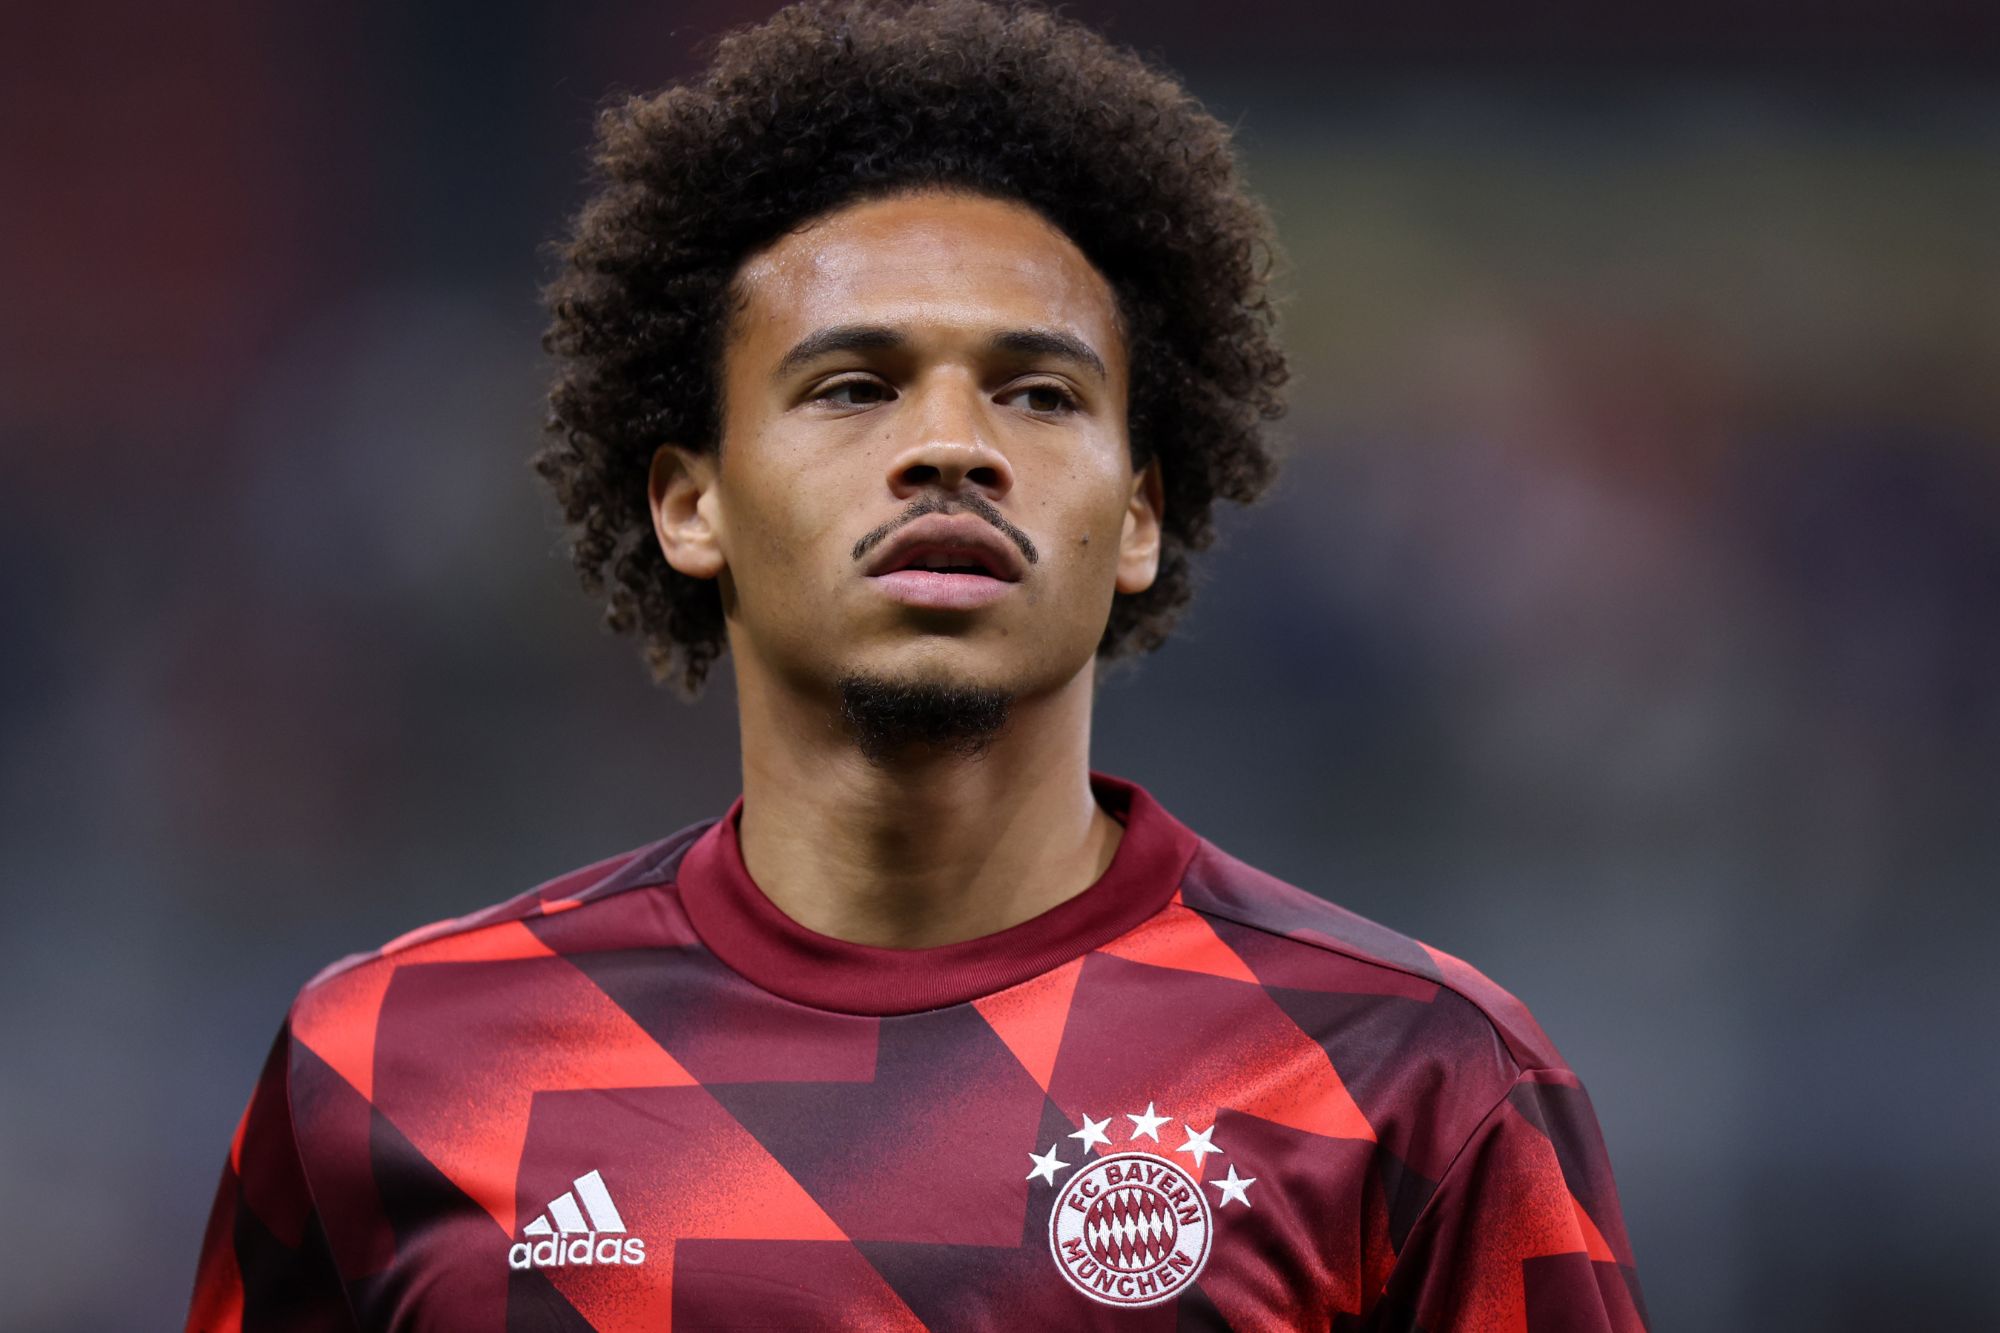 The Truth About Leroy Sane’s Religion: Is he Really a Muslim or Not?